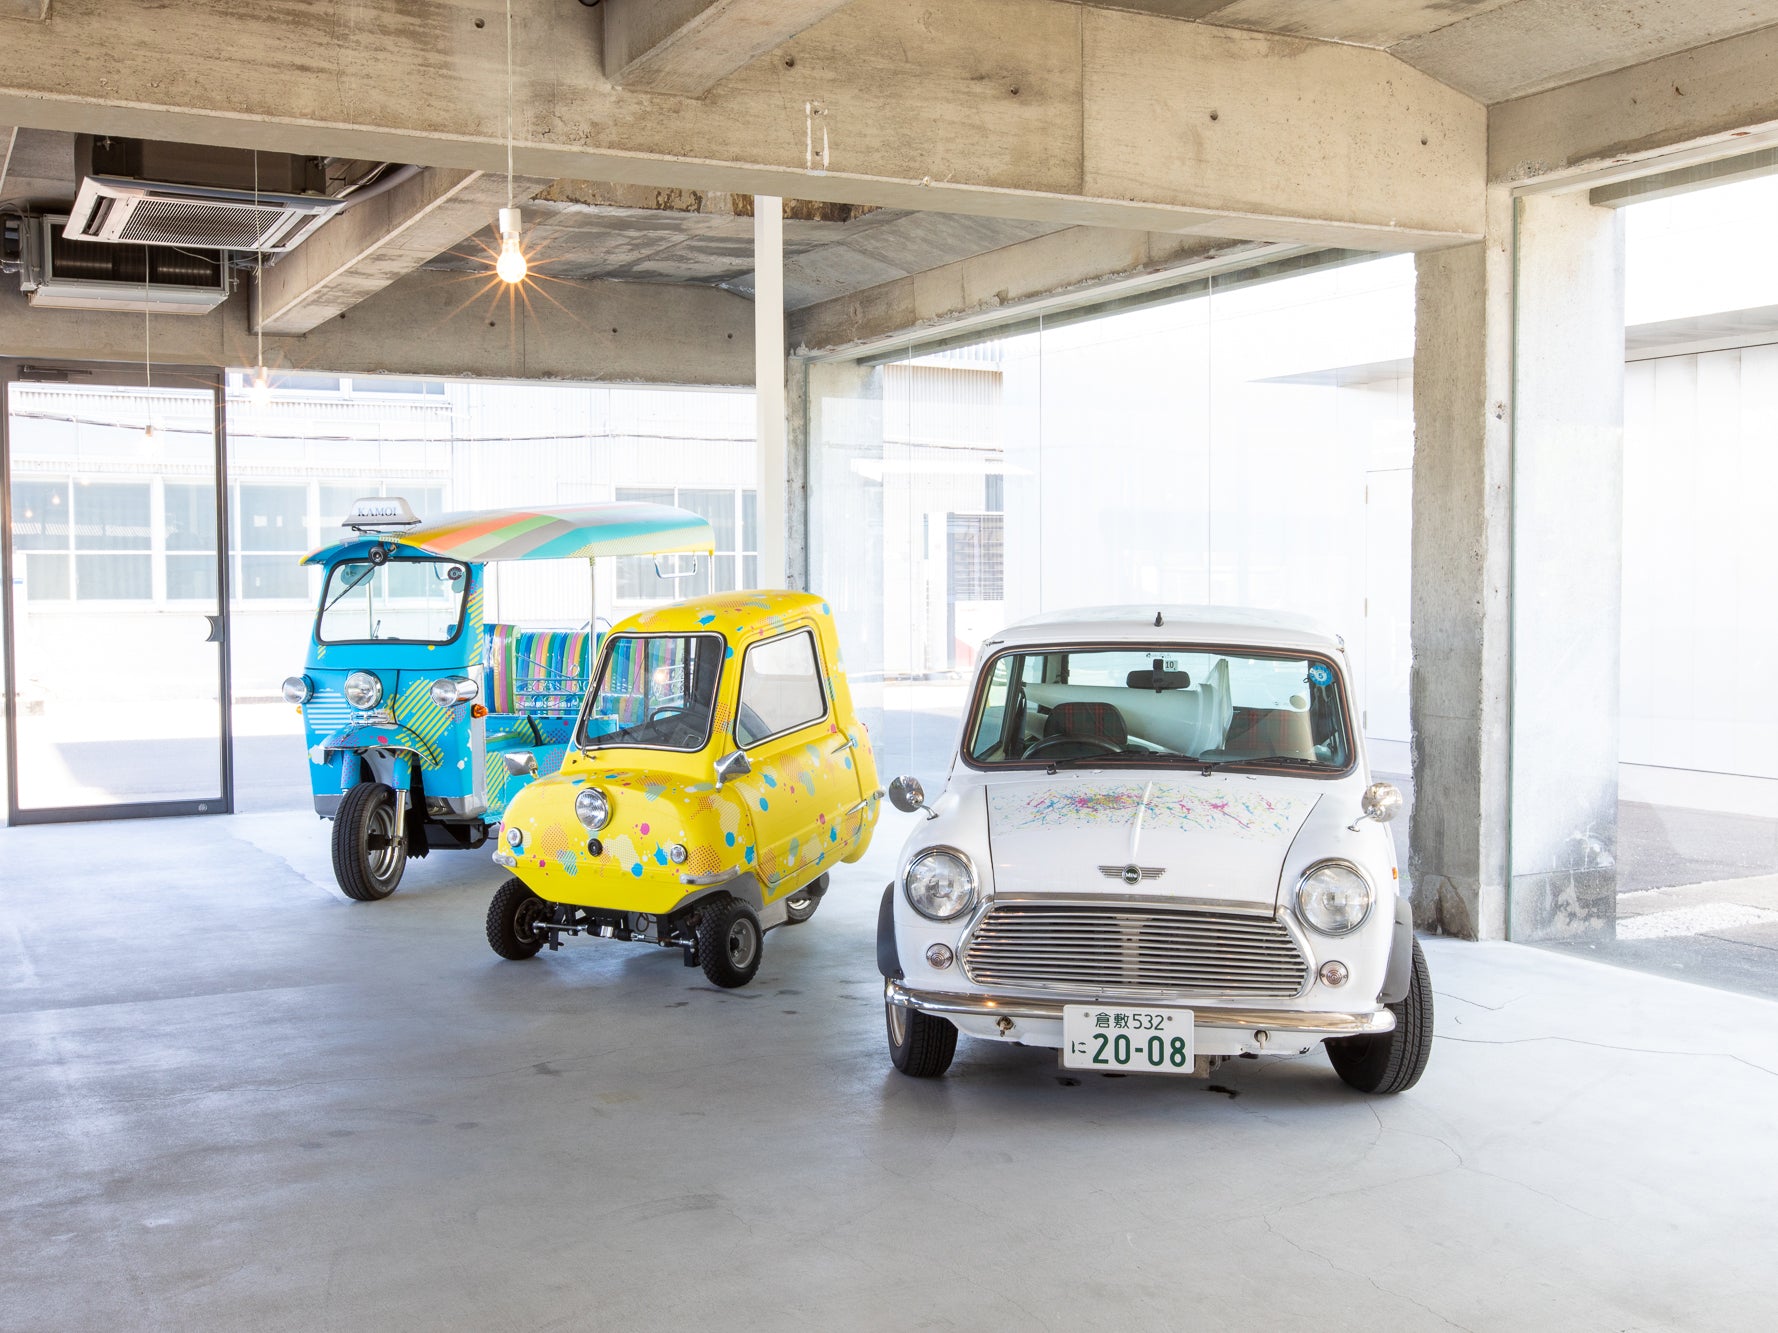 Warehouse with a tuktuk, Japanese bubble car and a MINI decorated in mt 'washi' Masking Tape.